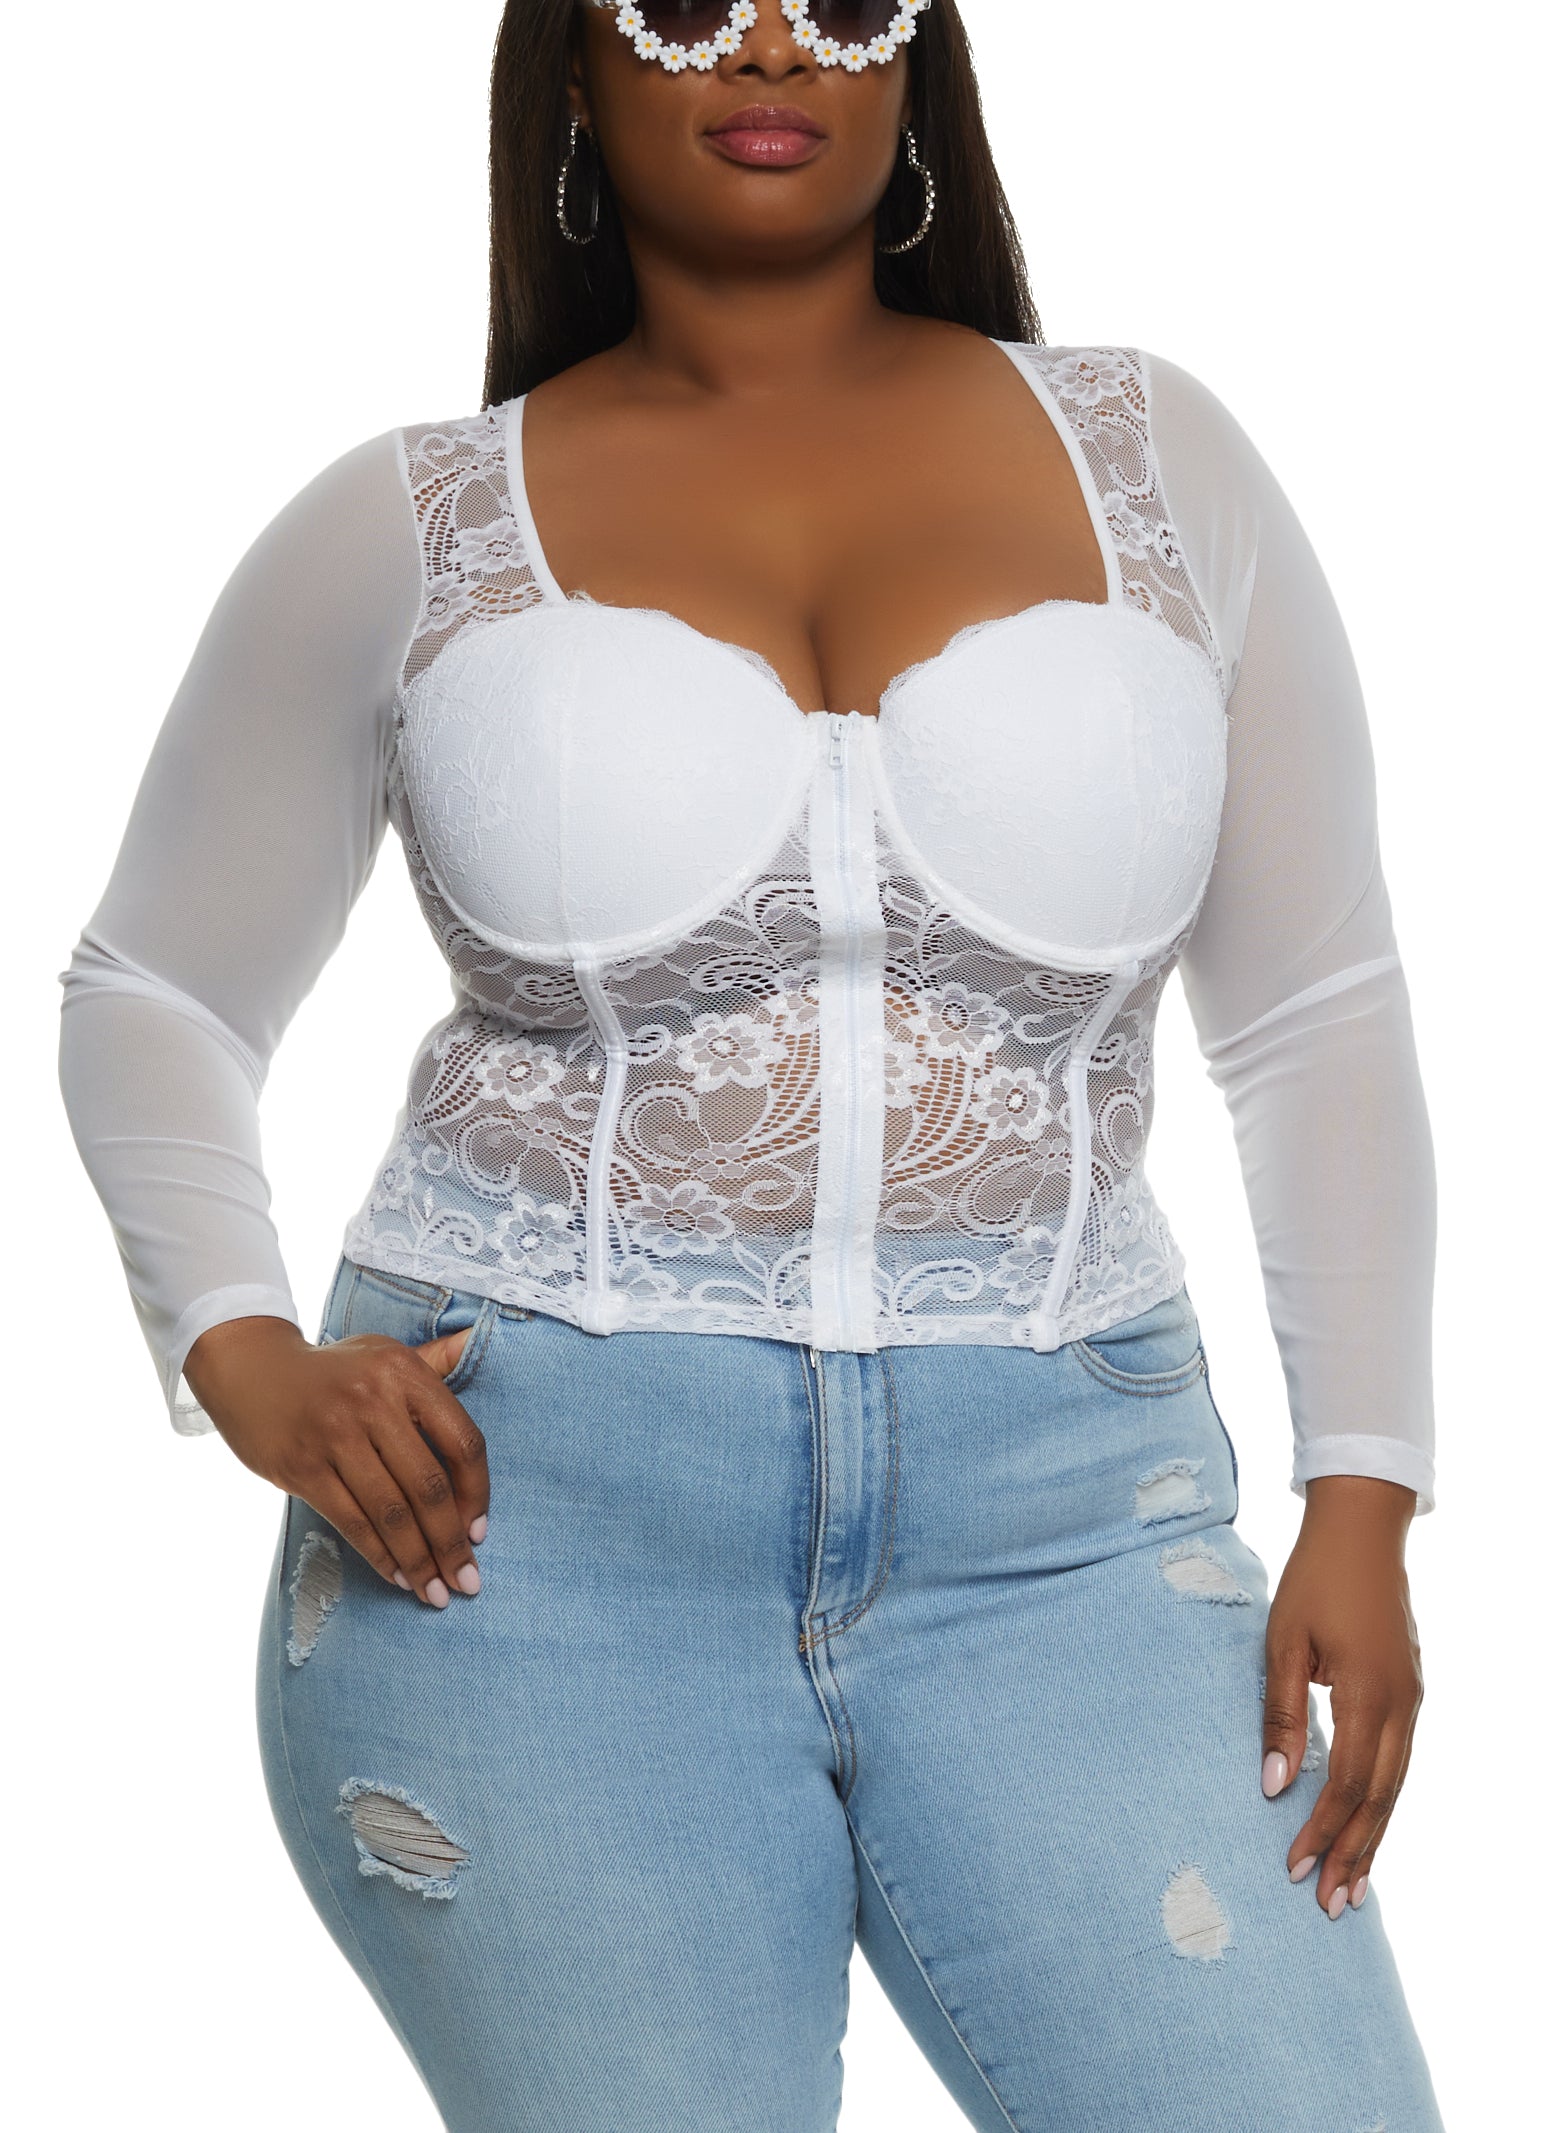 Plus Size Bustiers and Corsets